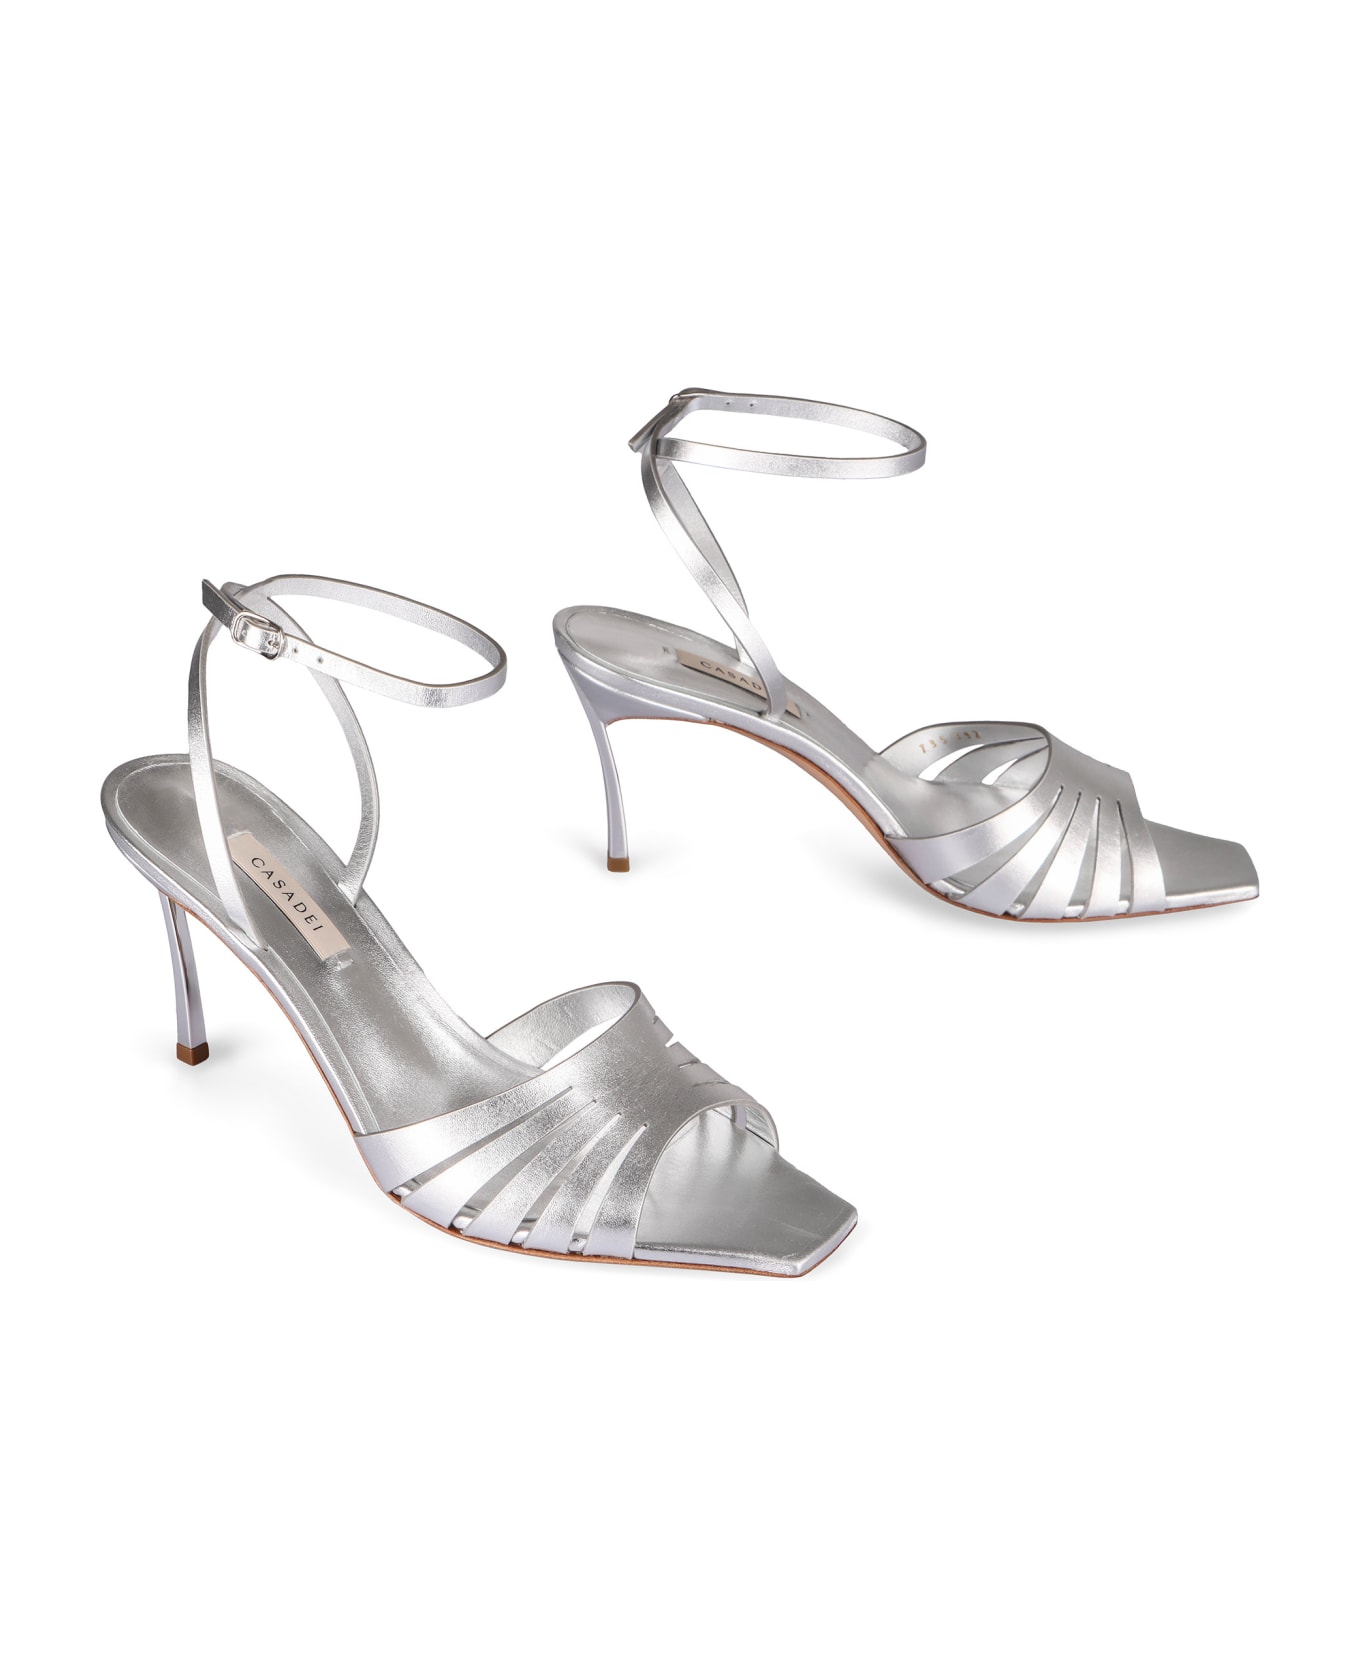 Casadei Flash Leather Sandals - Silver